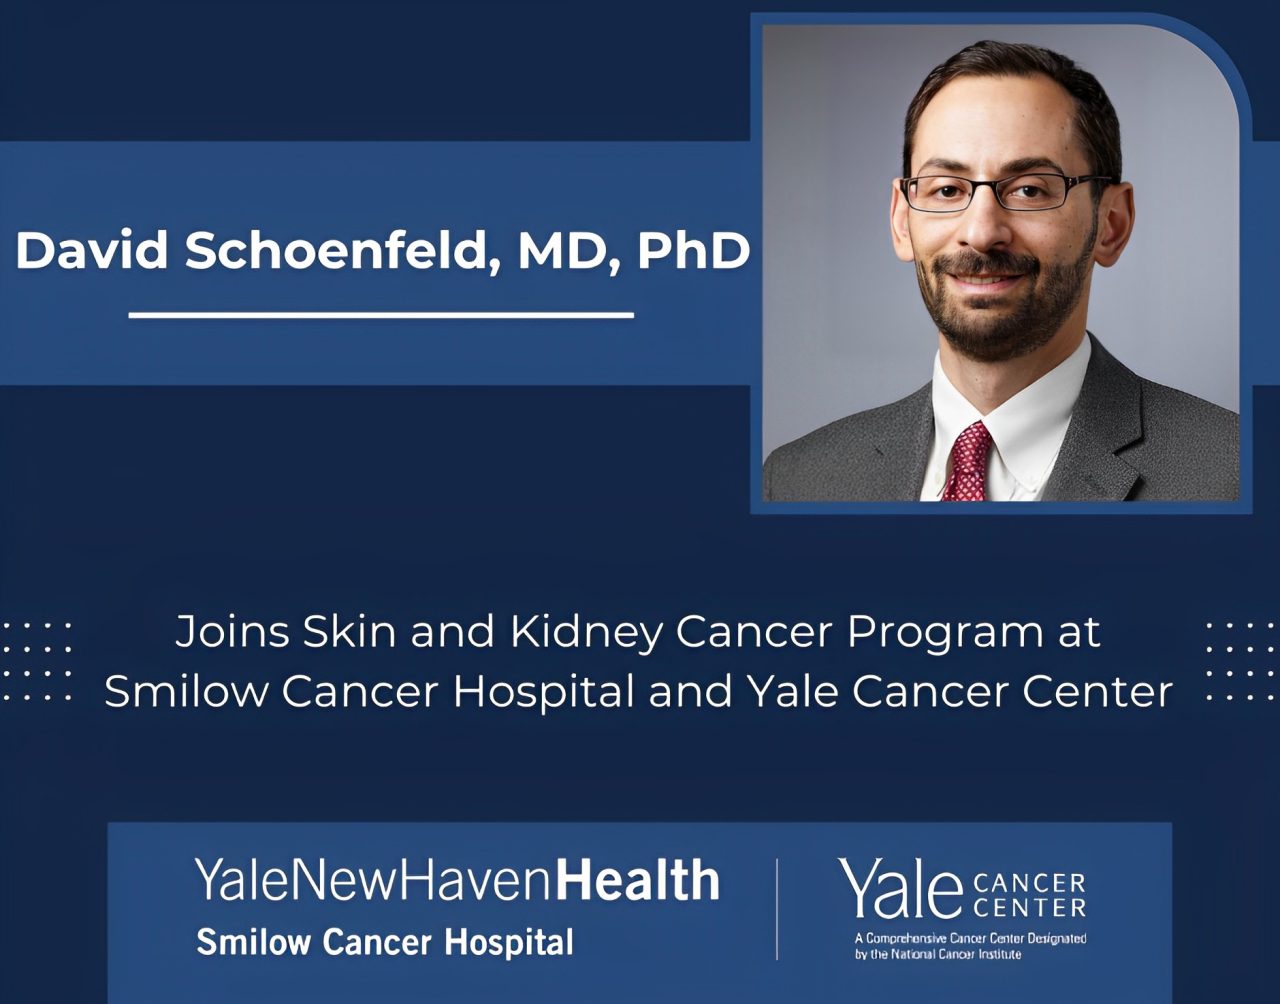 The Skin and Kidney Cancer Program at Smilow Cancer Hospital and Yale Cancer Center welcomes David Schoenfeld as Instructor of Medicine (Medical Oncology). – Yale Cancer Center